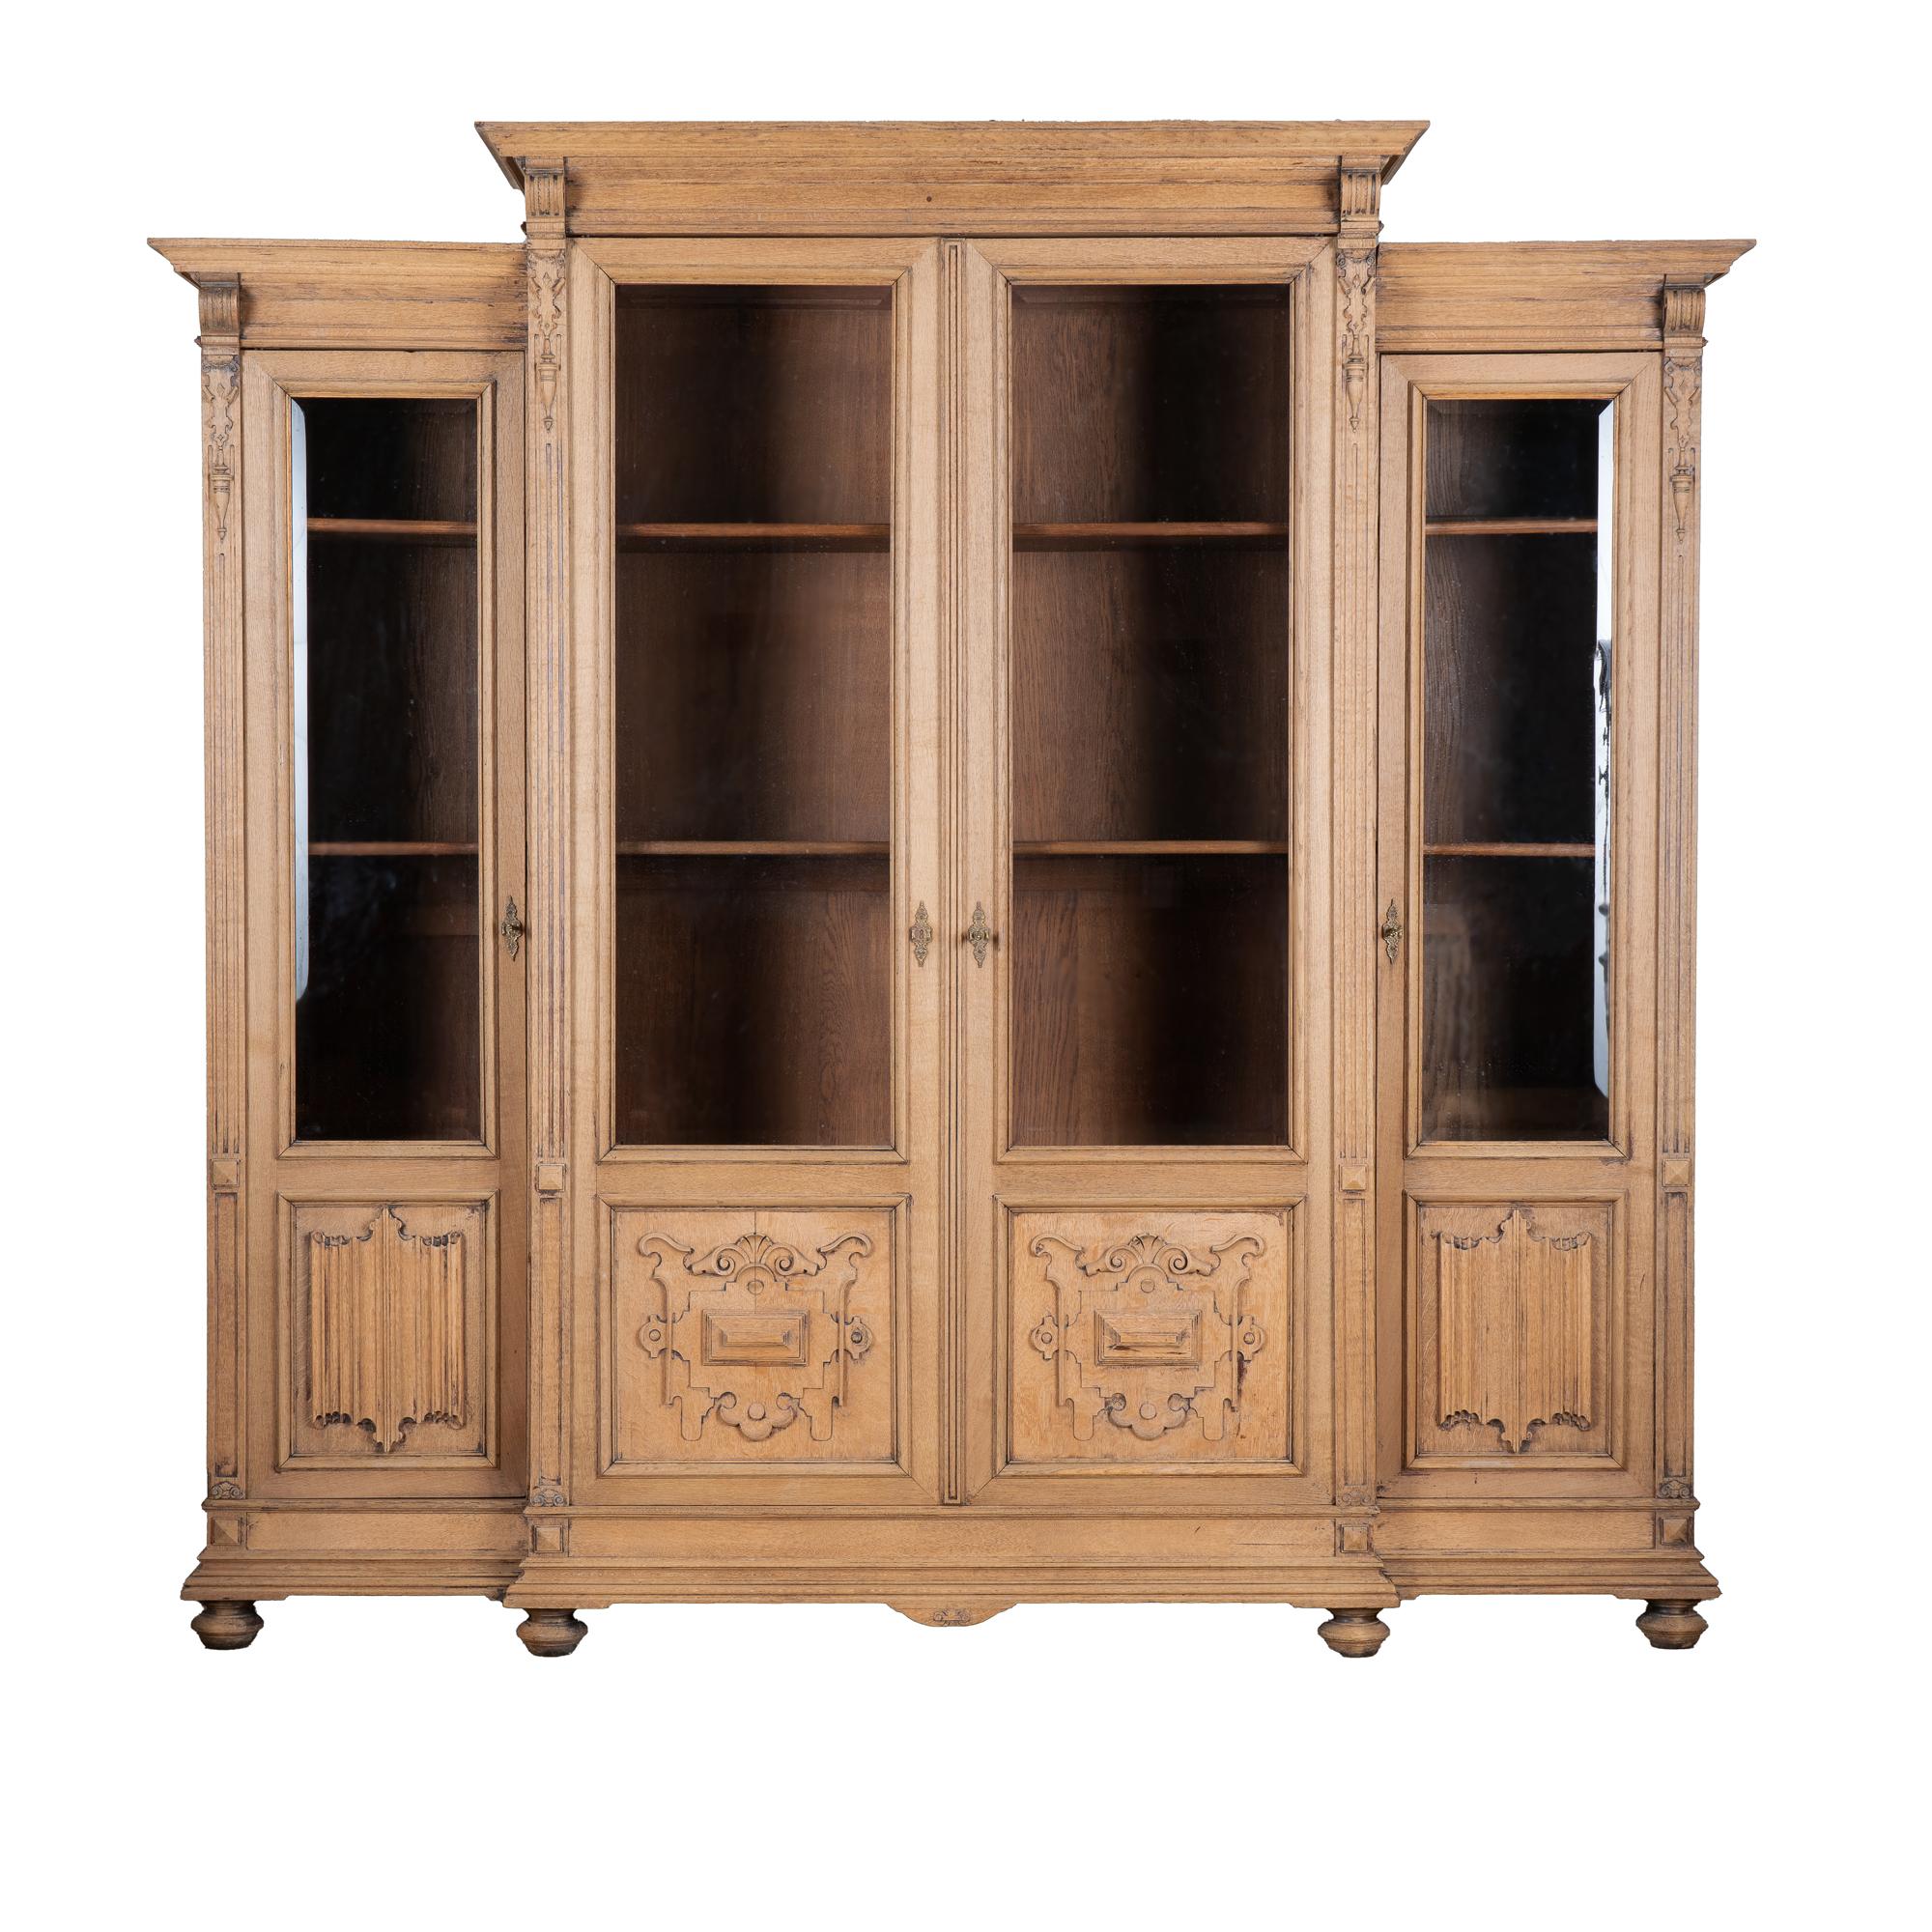 The elongated four beveled glass doors are complimented by the carved details in this statuesque bookcase from France.
The oak has been bleached, giving it a fresh look for today's modern home while highlighting the attractive French country